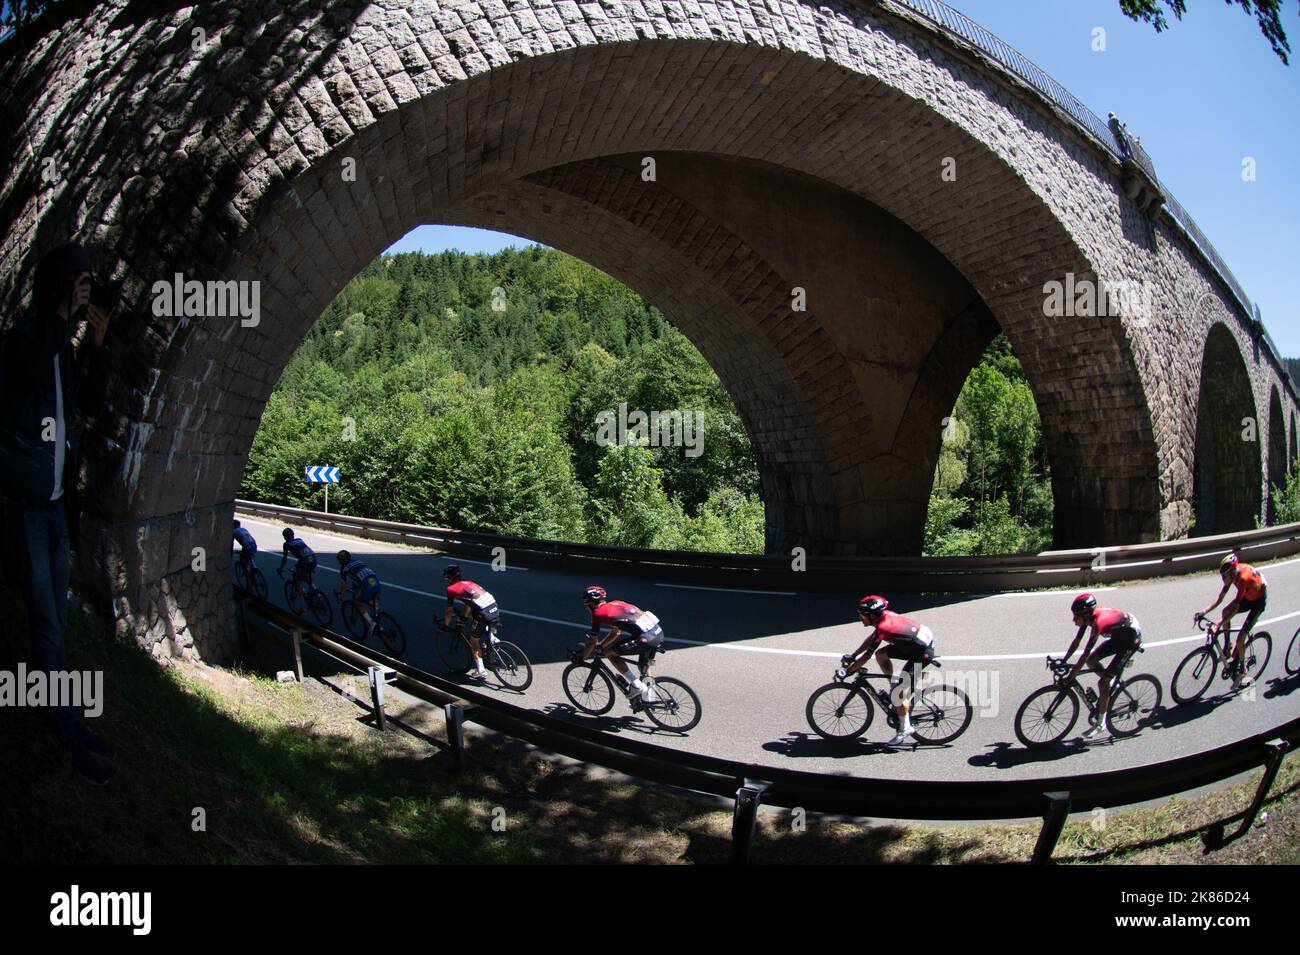 The chasing peloton including Alejandro Valverde and the Ineos Team with Geraint Thomas and Egan Bernal  ride under an archway bridge during the Tour de France 2019 Stage 5 - Saint-Die-Des-Vosges to Colmar Stock Photo